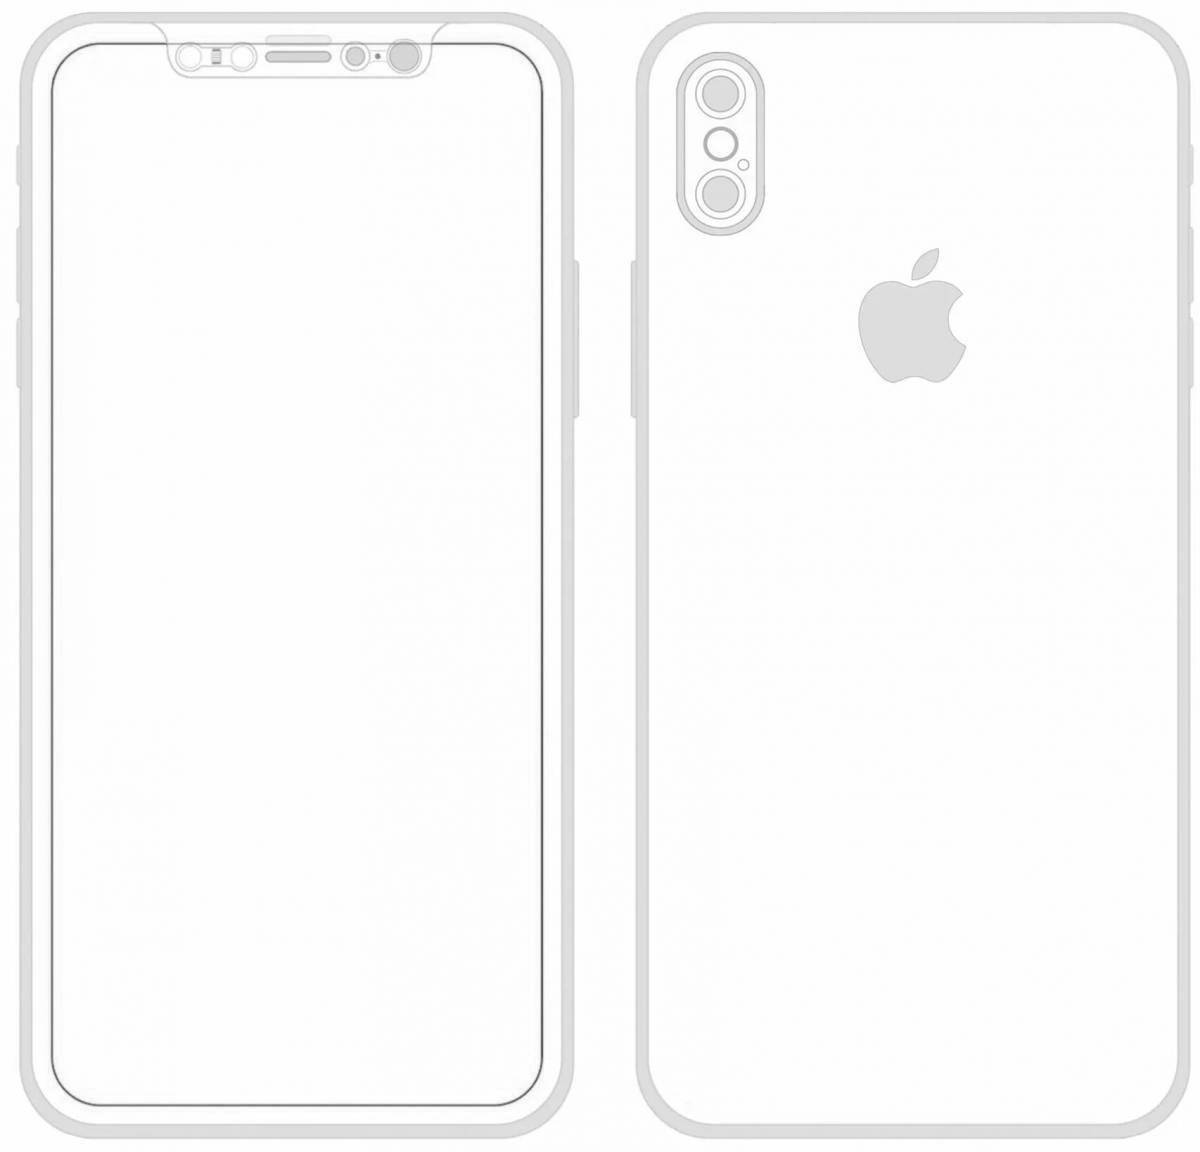 Attractive iphone x coloring page